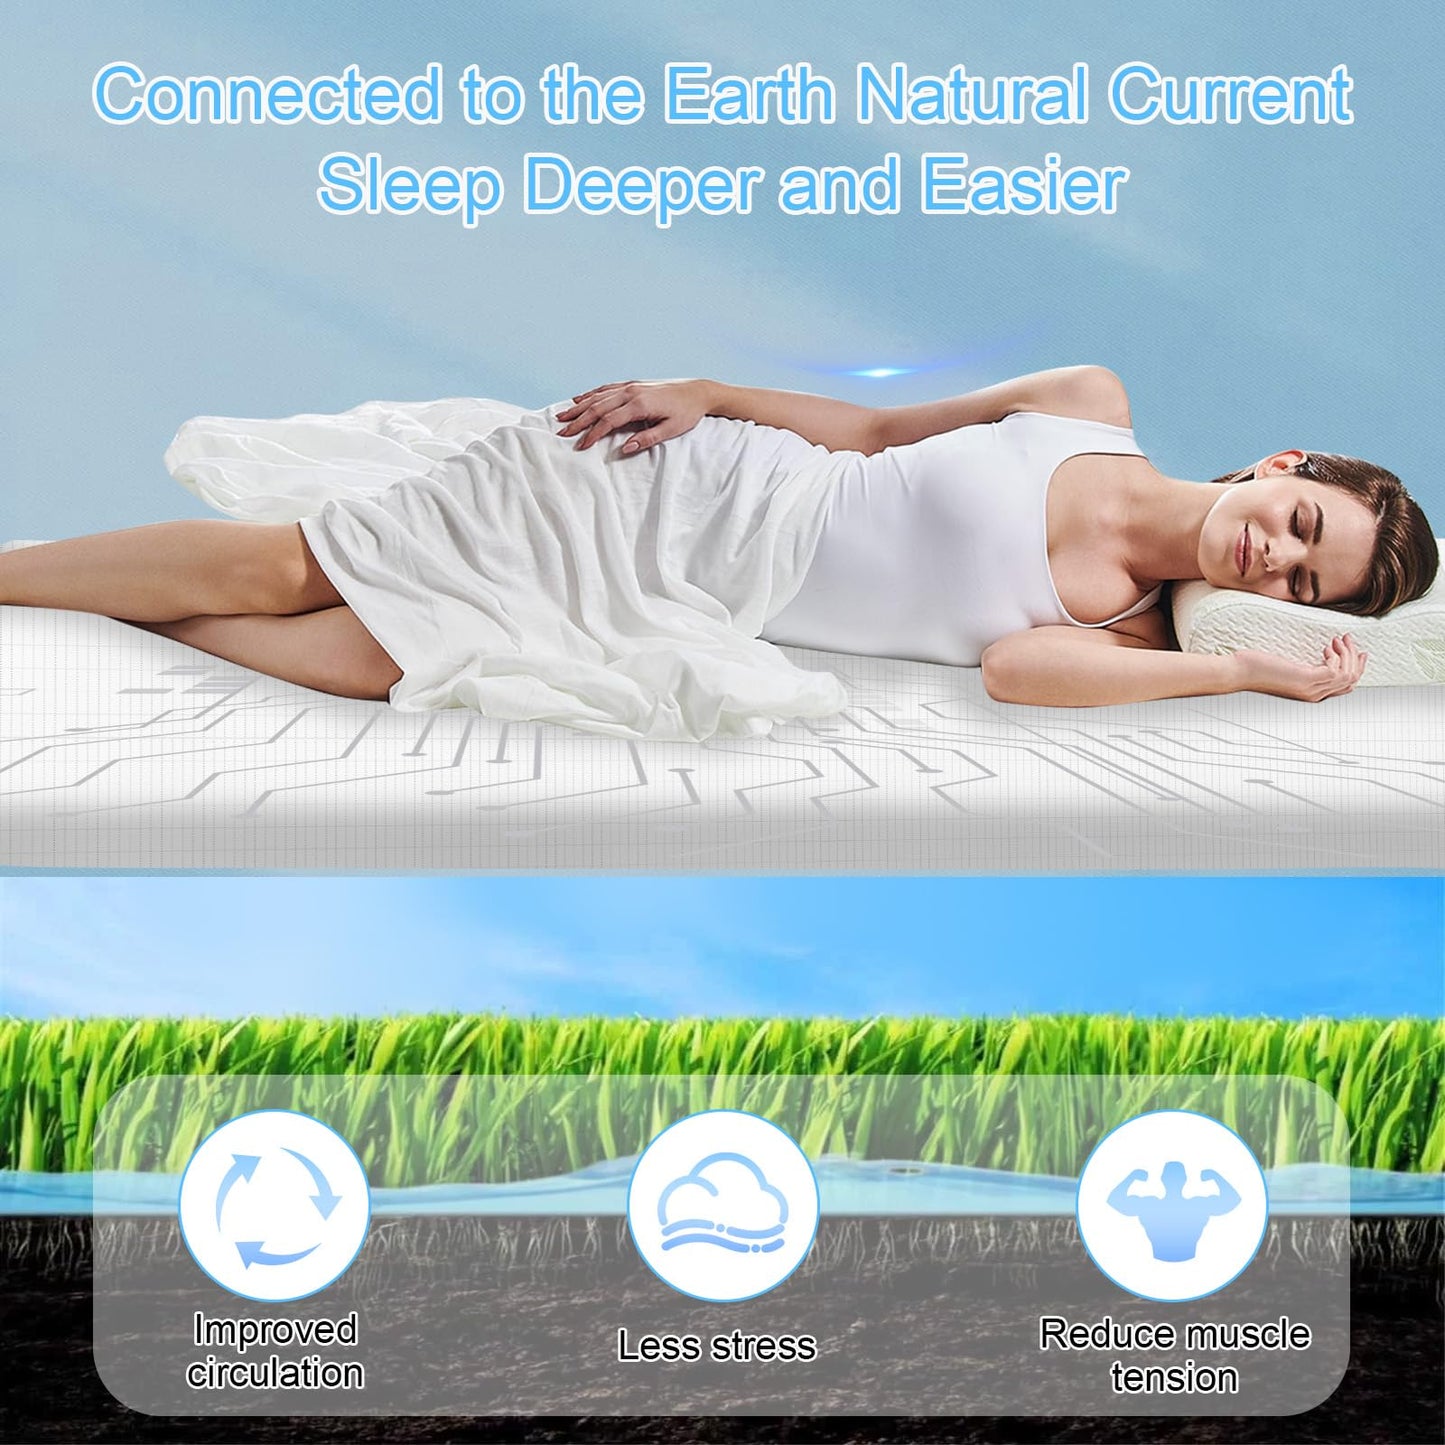 ConBlom Grounding Fitted Sheet with Grounding Cord, Earthing Sheets King Size, 5% Silver Fiber & 95% Cotton Fiber, Conductive Earthing Bed Sheet for Better Sleep (White, King)